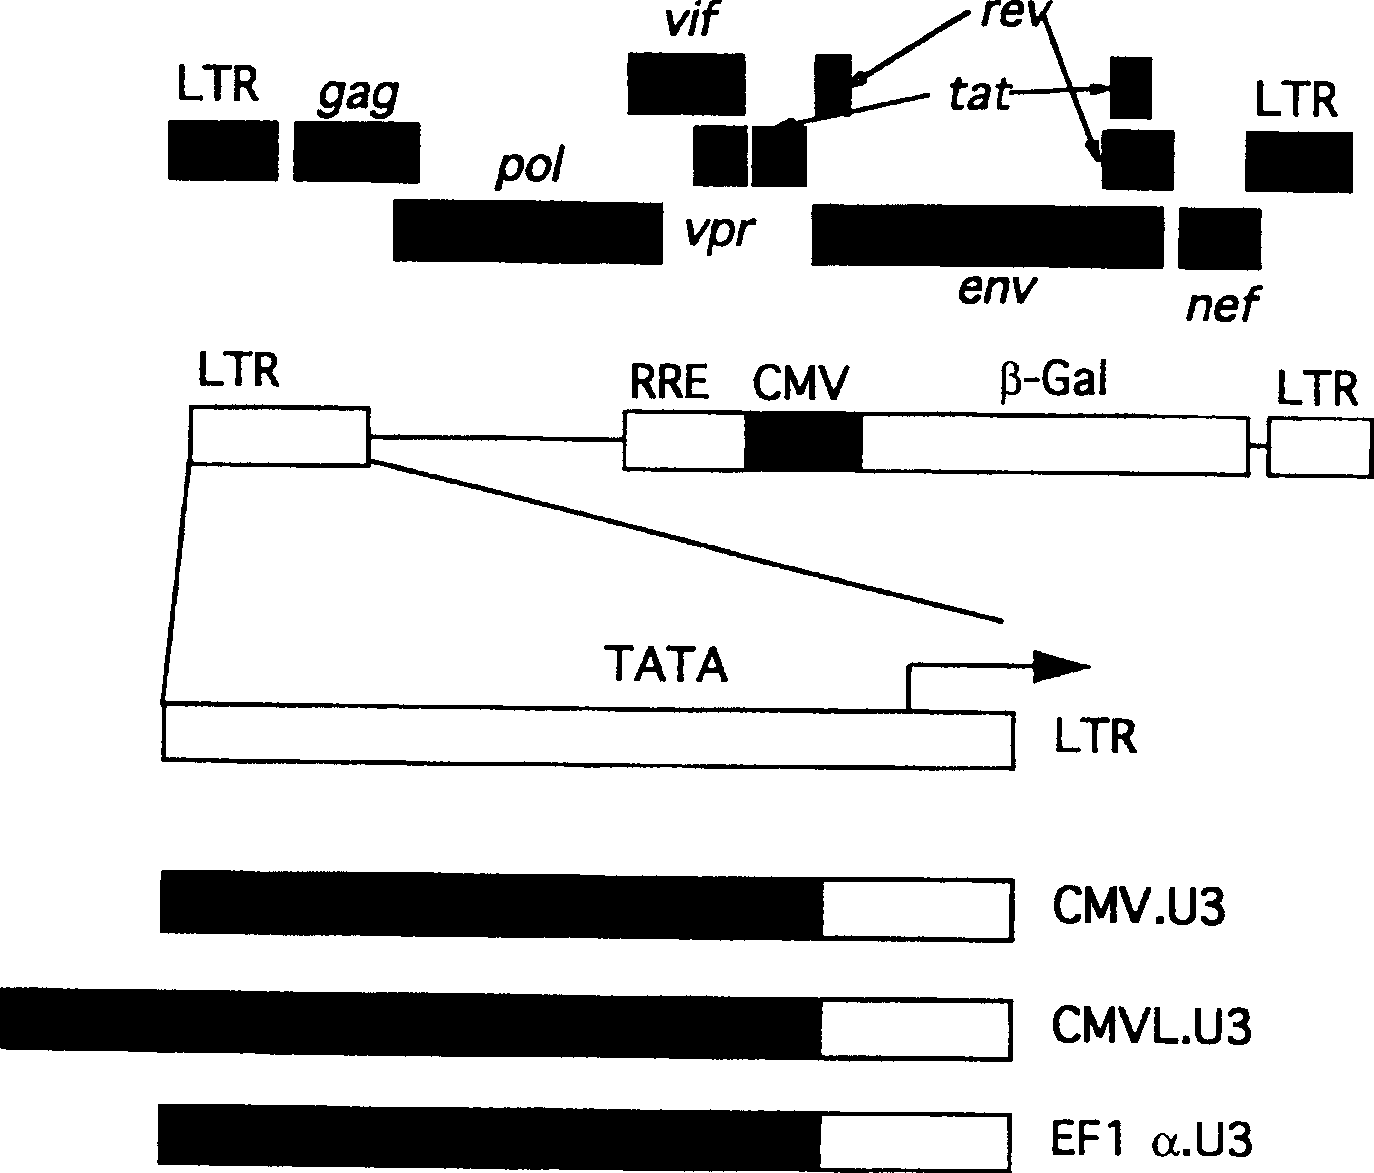 Vector for expressing two foreign genes